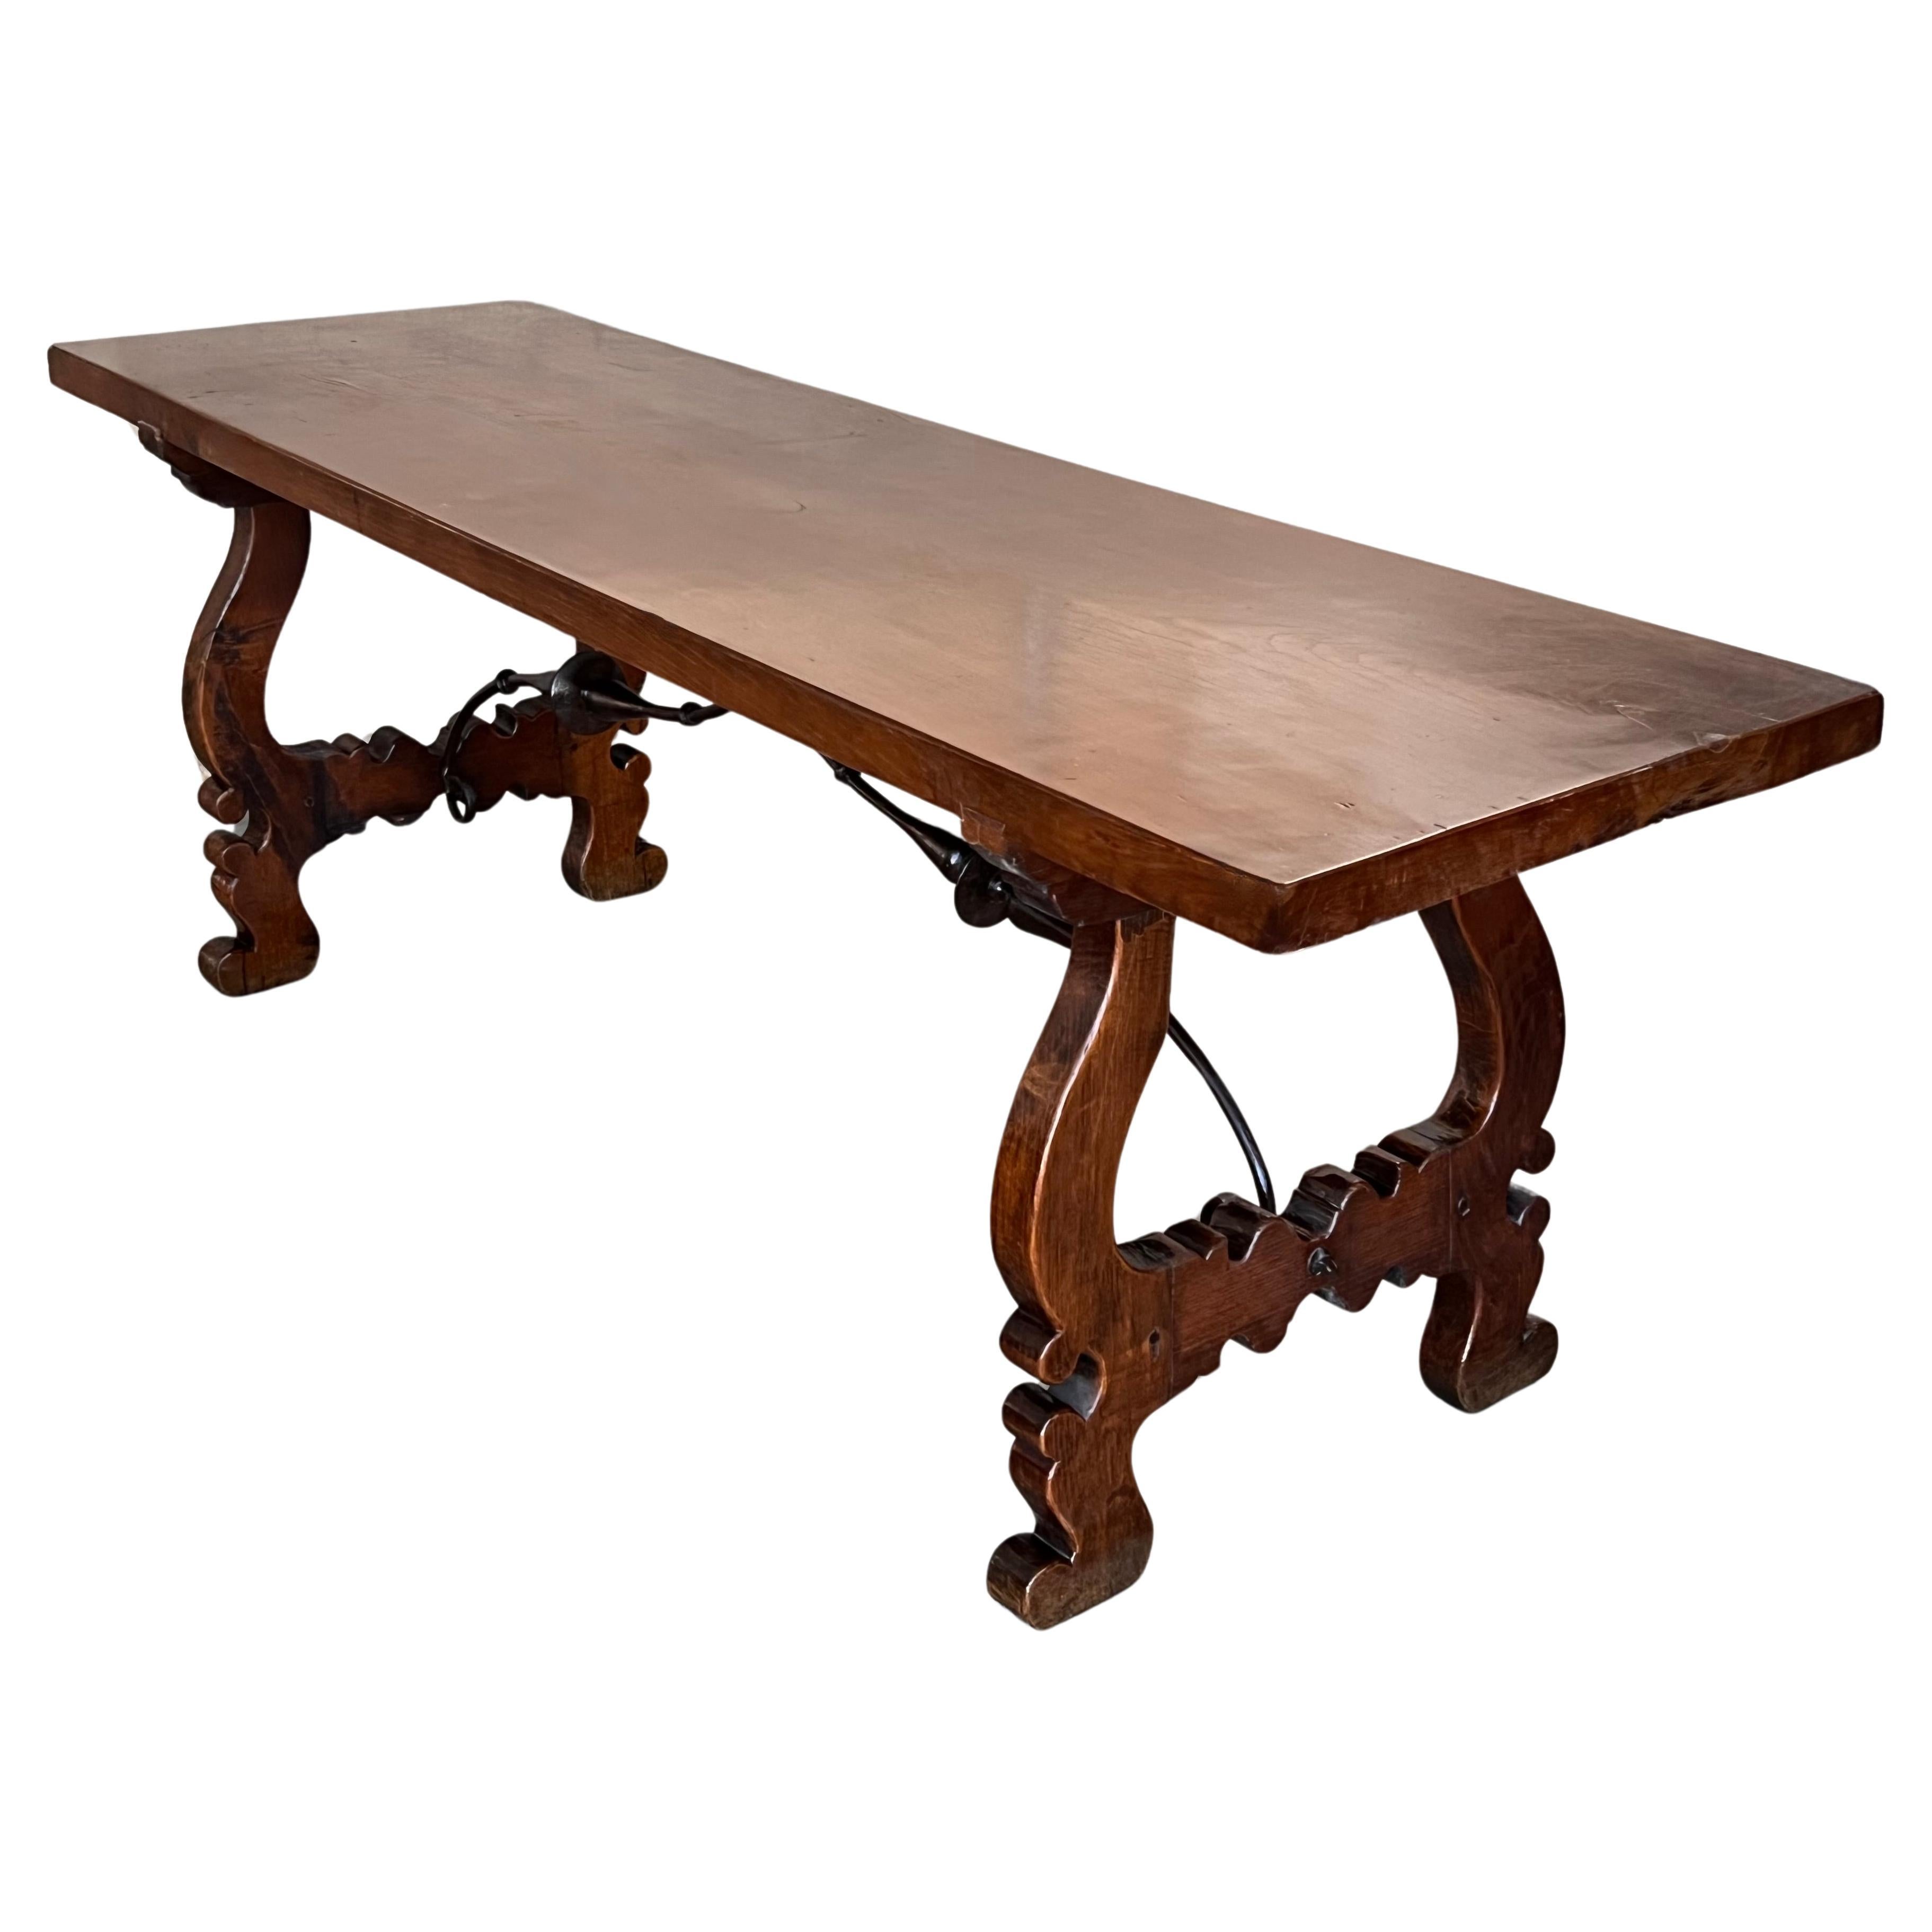 18th Dining or Console Table of Walnut with Lyre Legs and Heavy Top, Spain